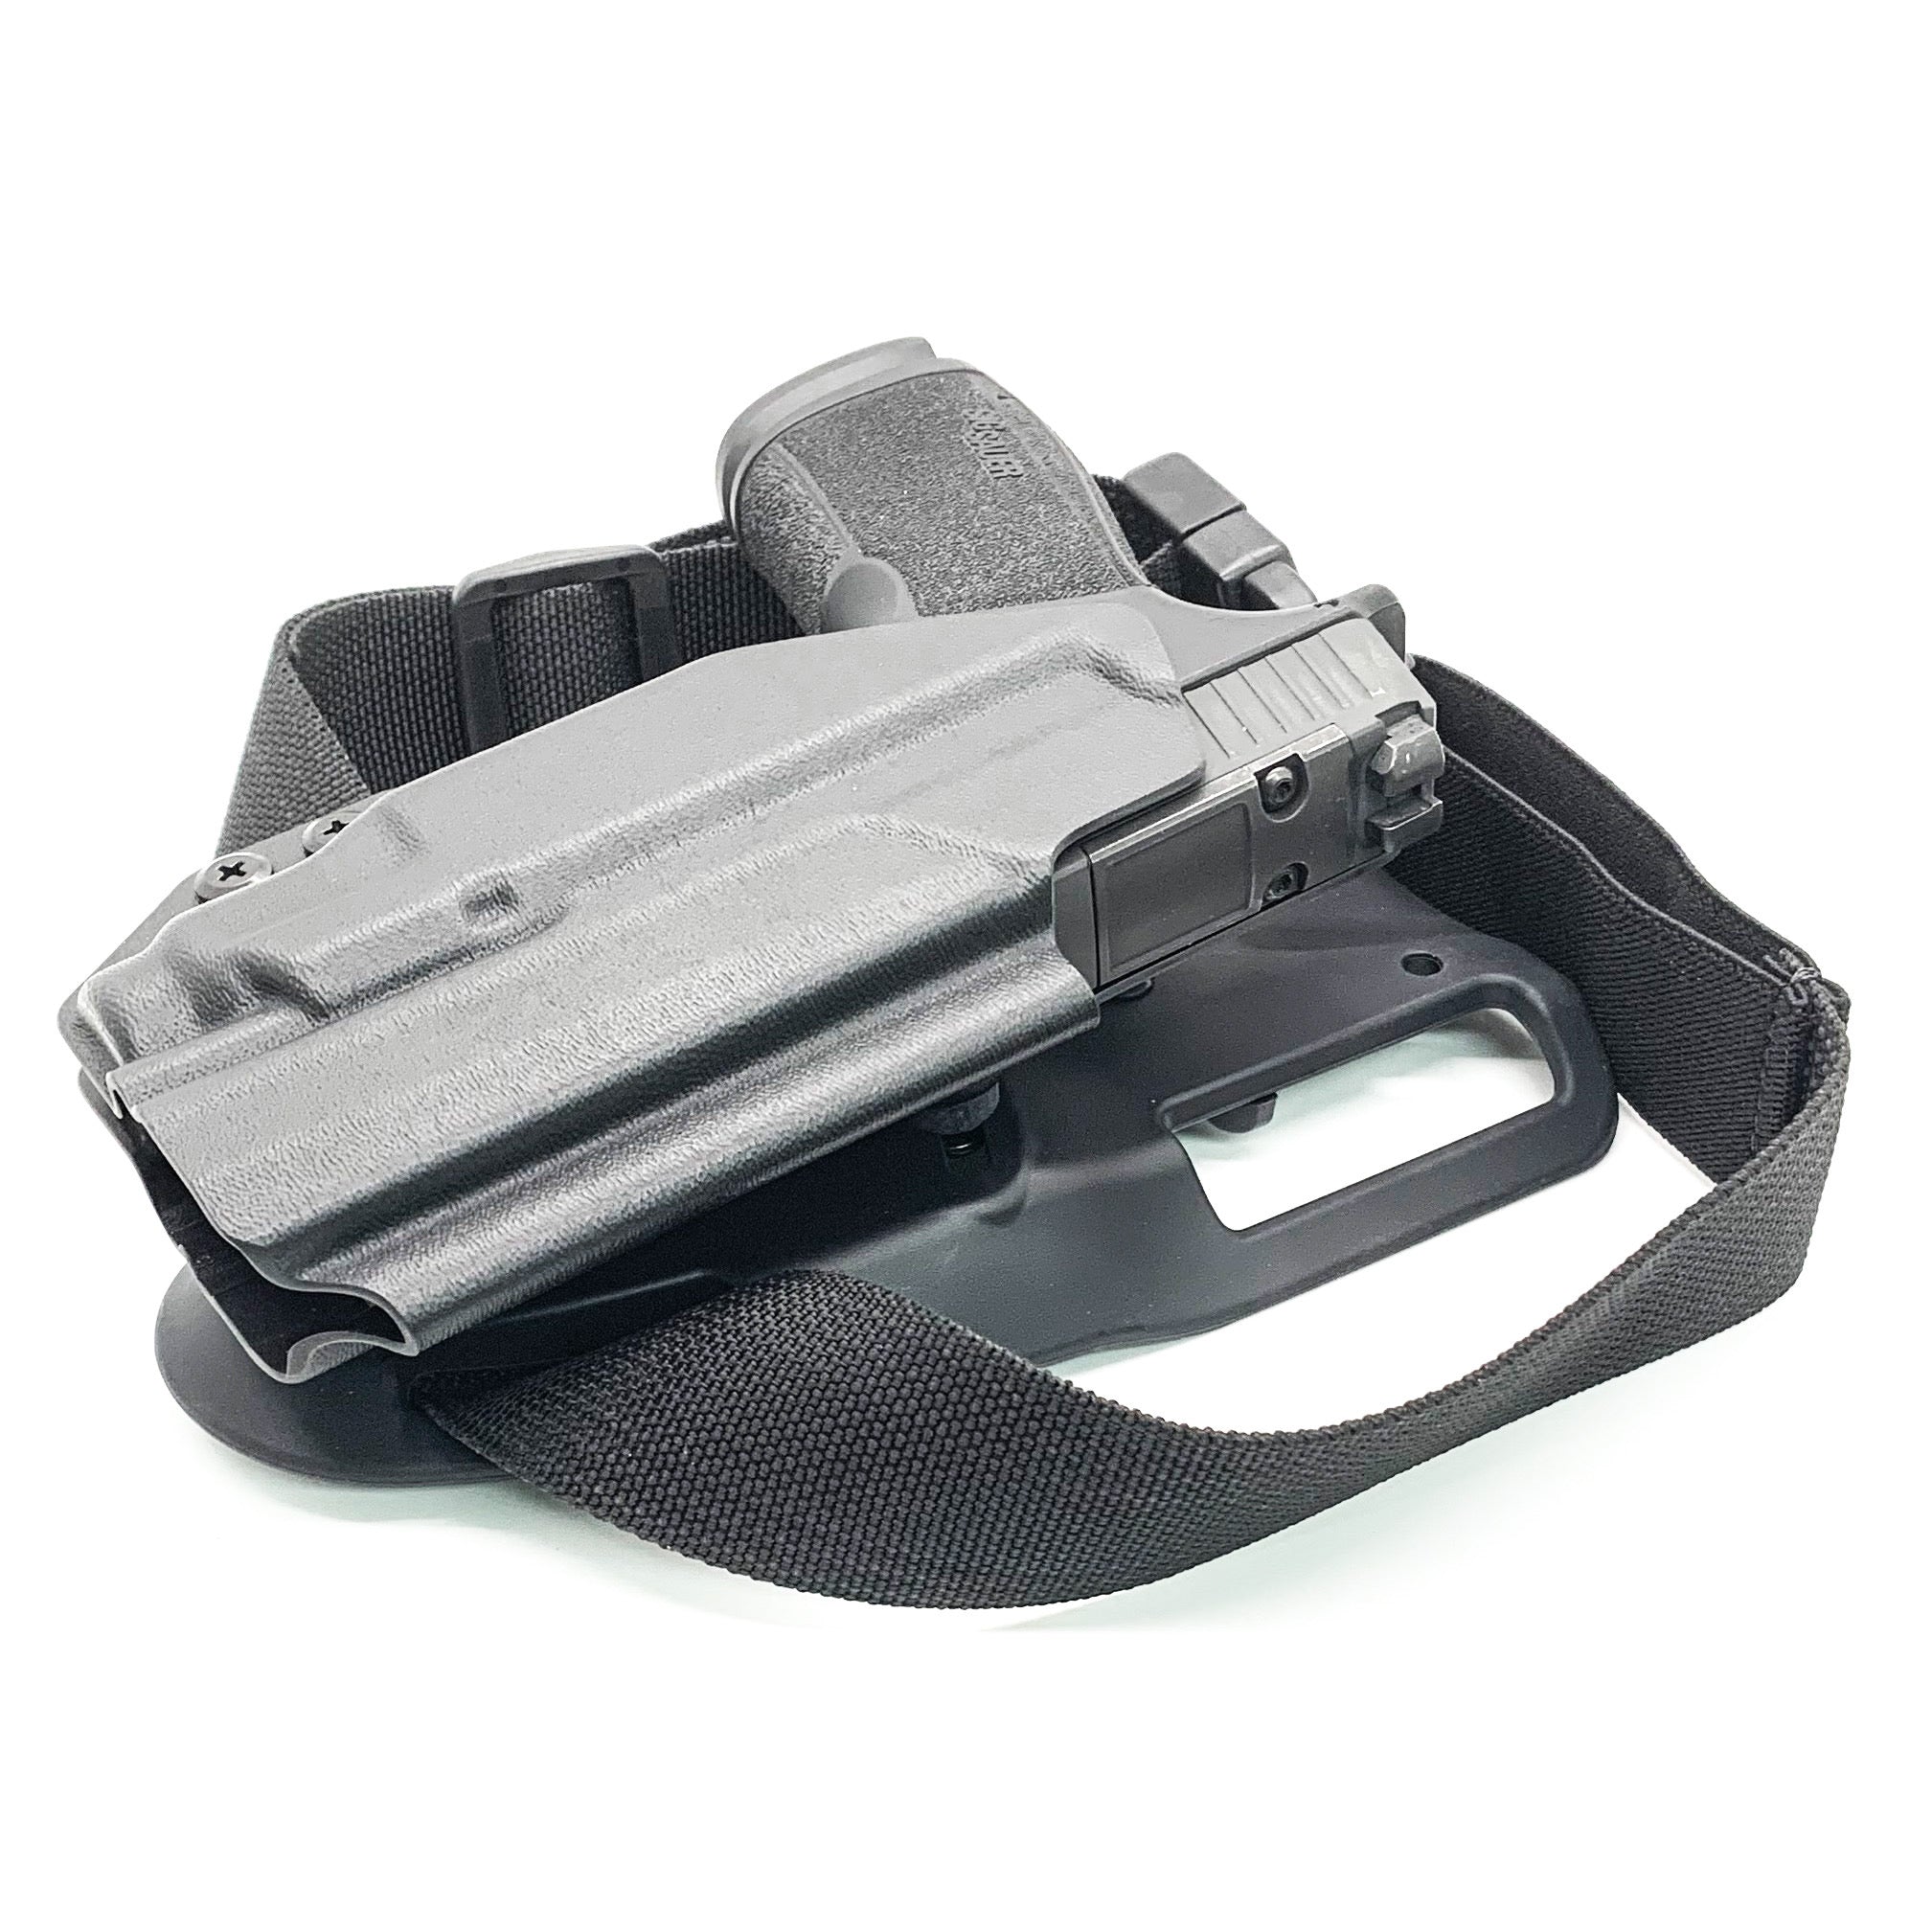 For the best Outside Waistband Duty & Competition Kydex Holster designed for the Sig Sauer P365-XMACRO or P365-XMACRO COMP with Streamlight TLR-7 Sub, shop Four Brothers Holsters.  Full sweat guard, adjustable retention, minimal material & smooth edges to reduce printing, cleared for red dot sights. Made in the USA. 